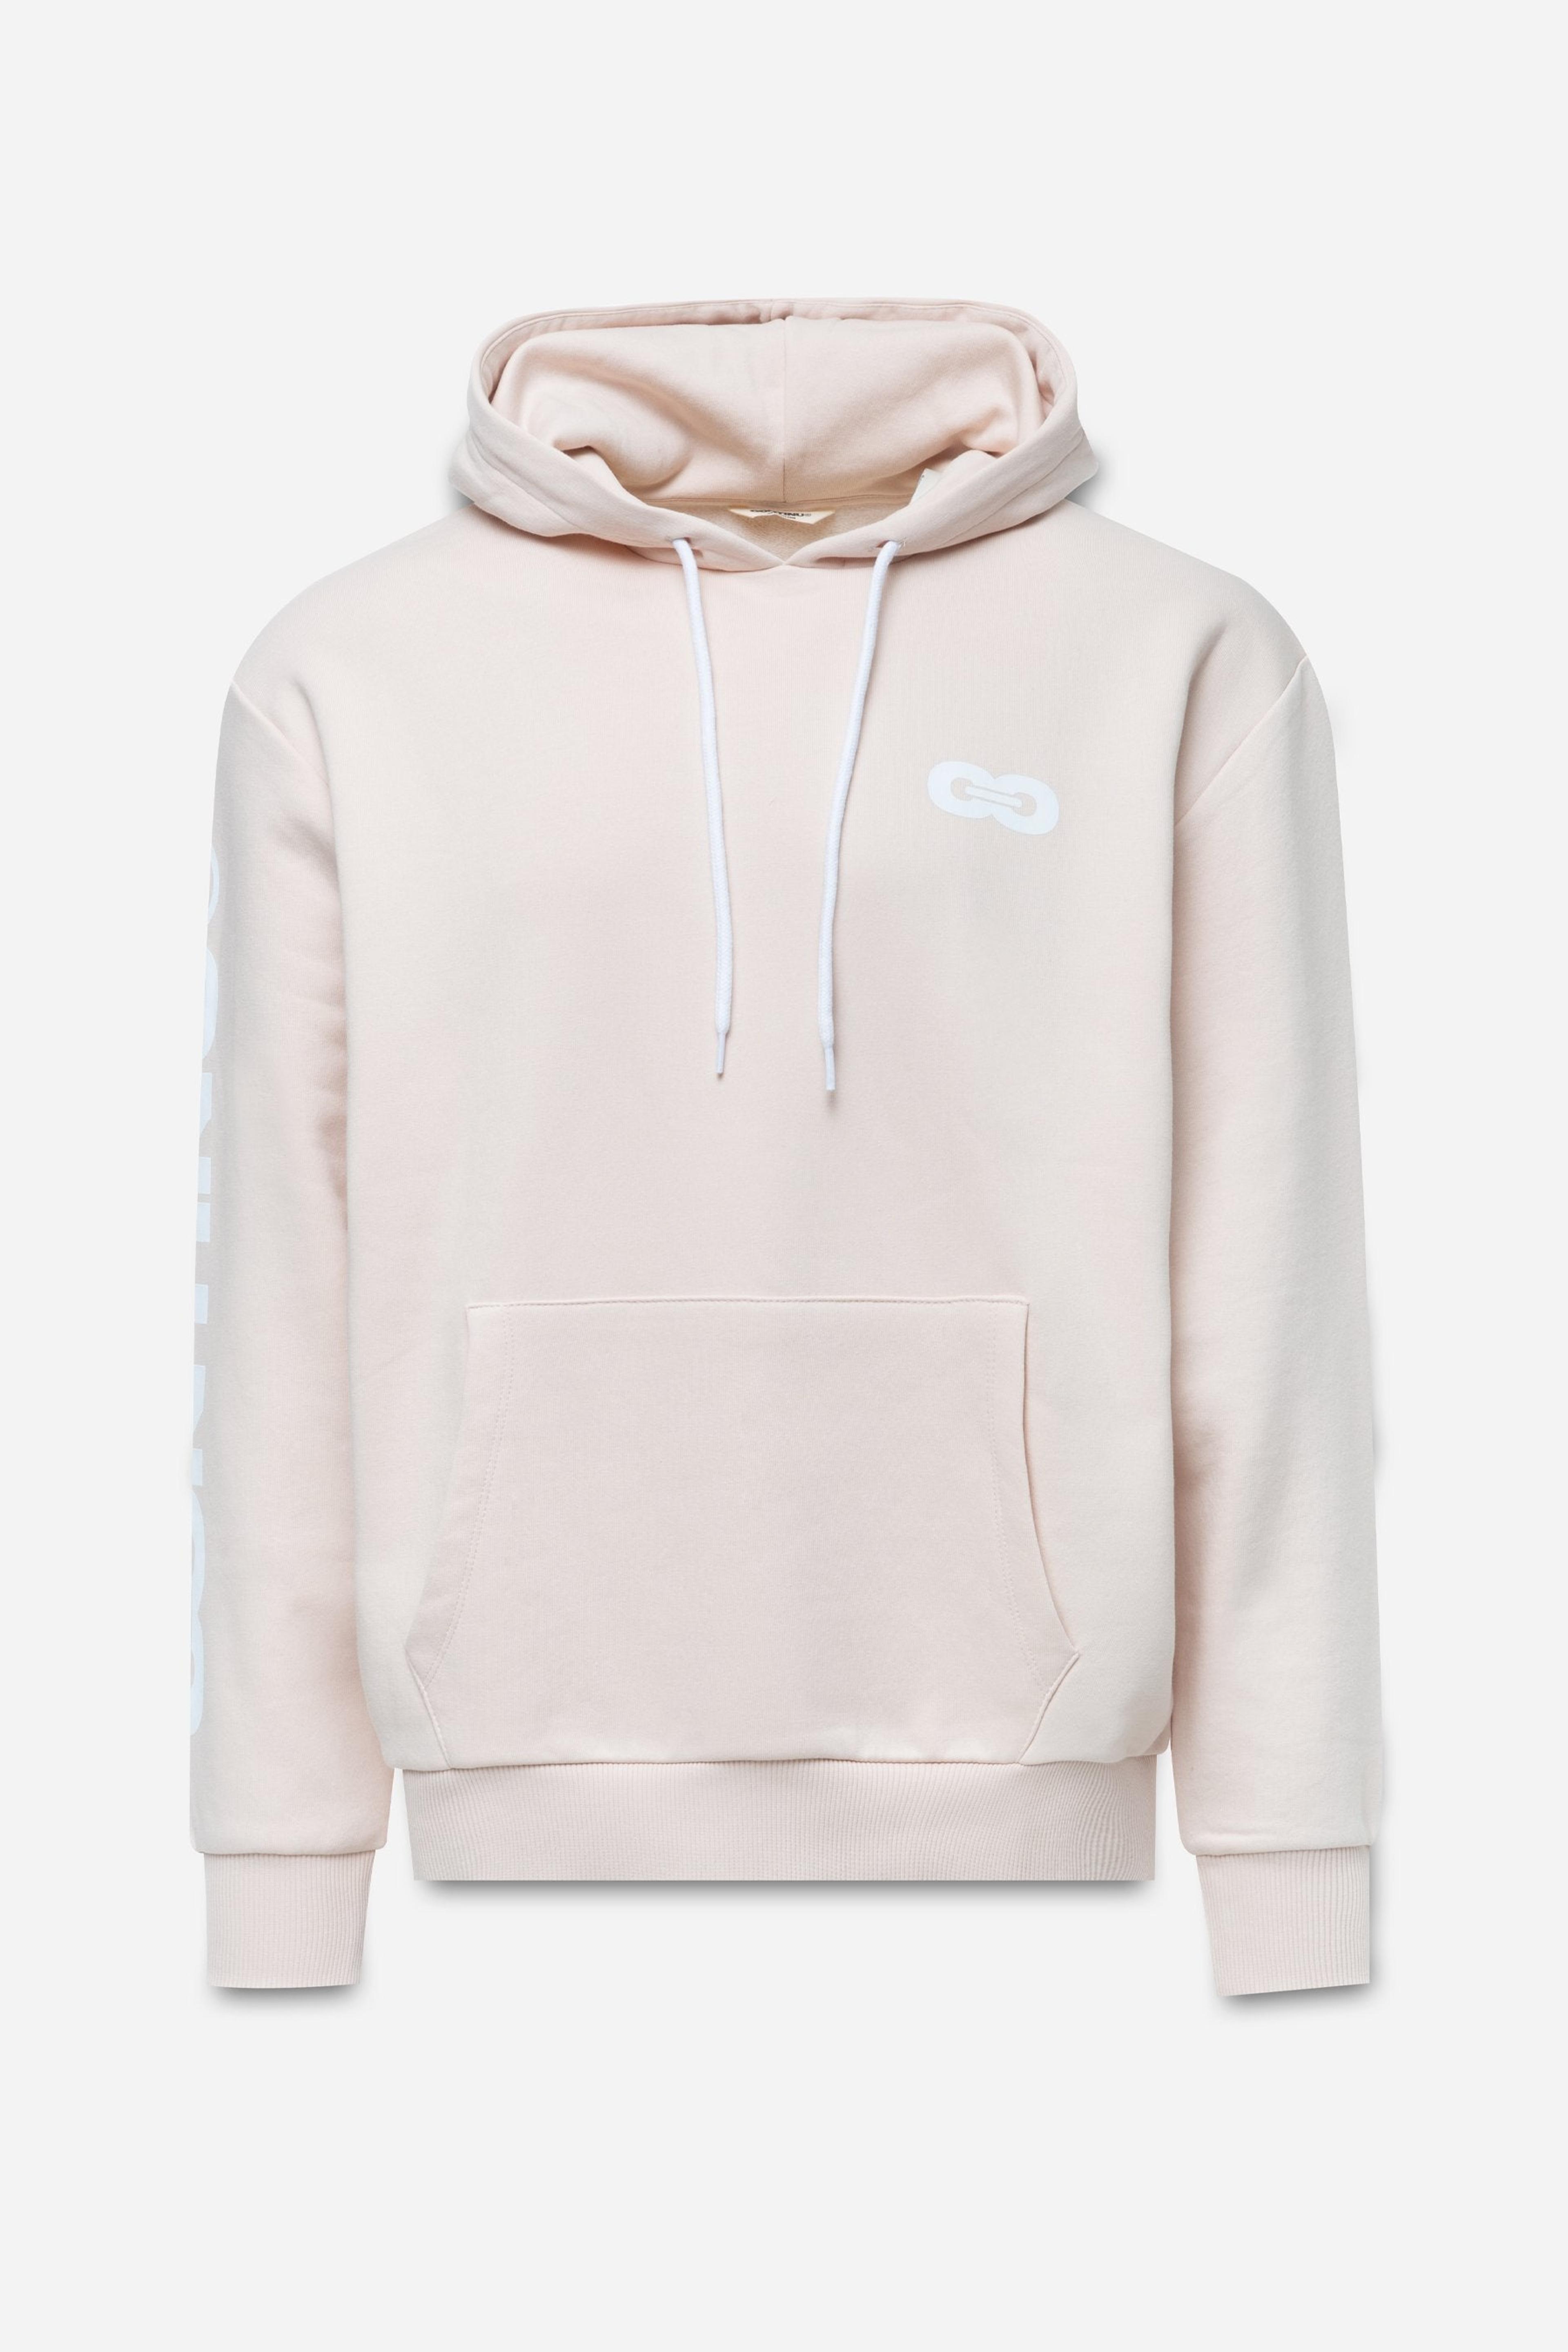 Alternate View 7 of CONTINU8 LIGHT PINK OVERSIZED HOODIE